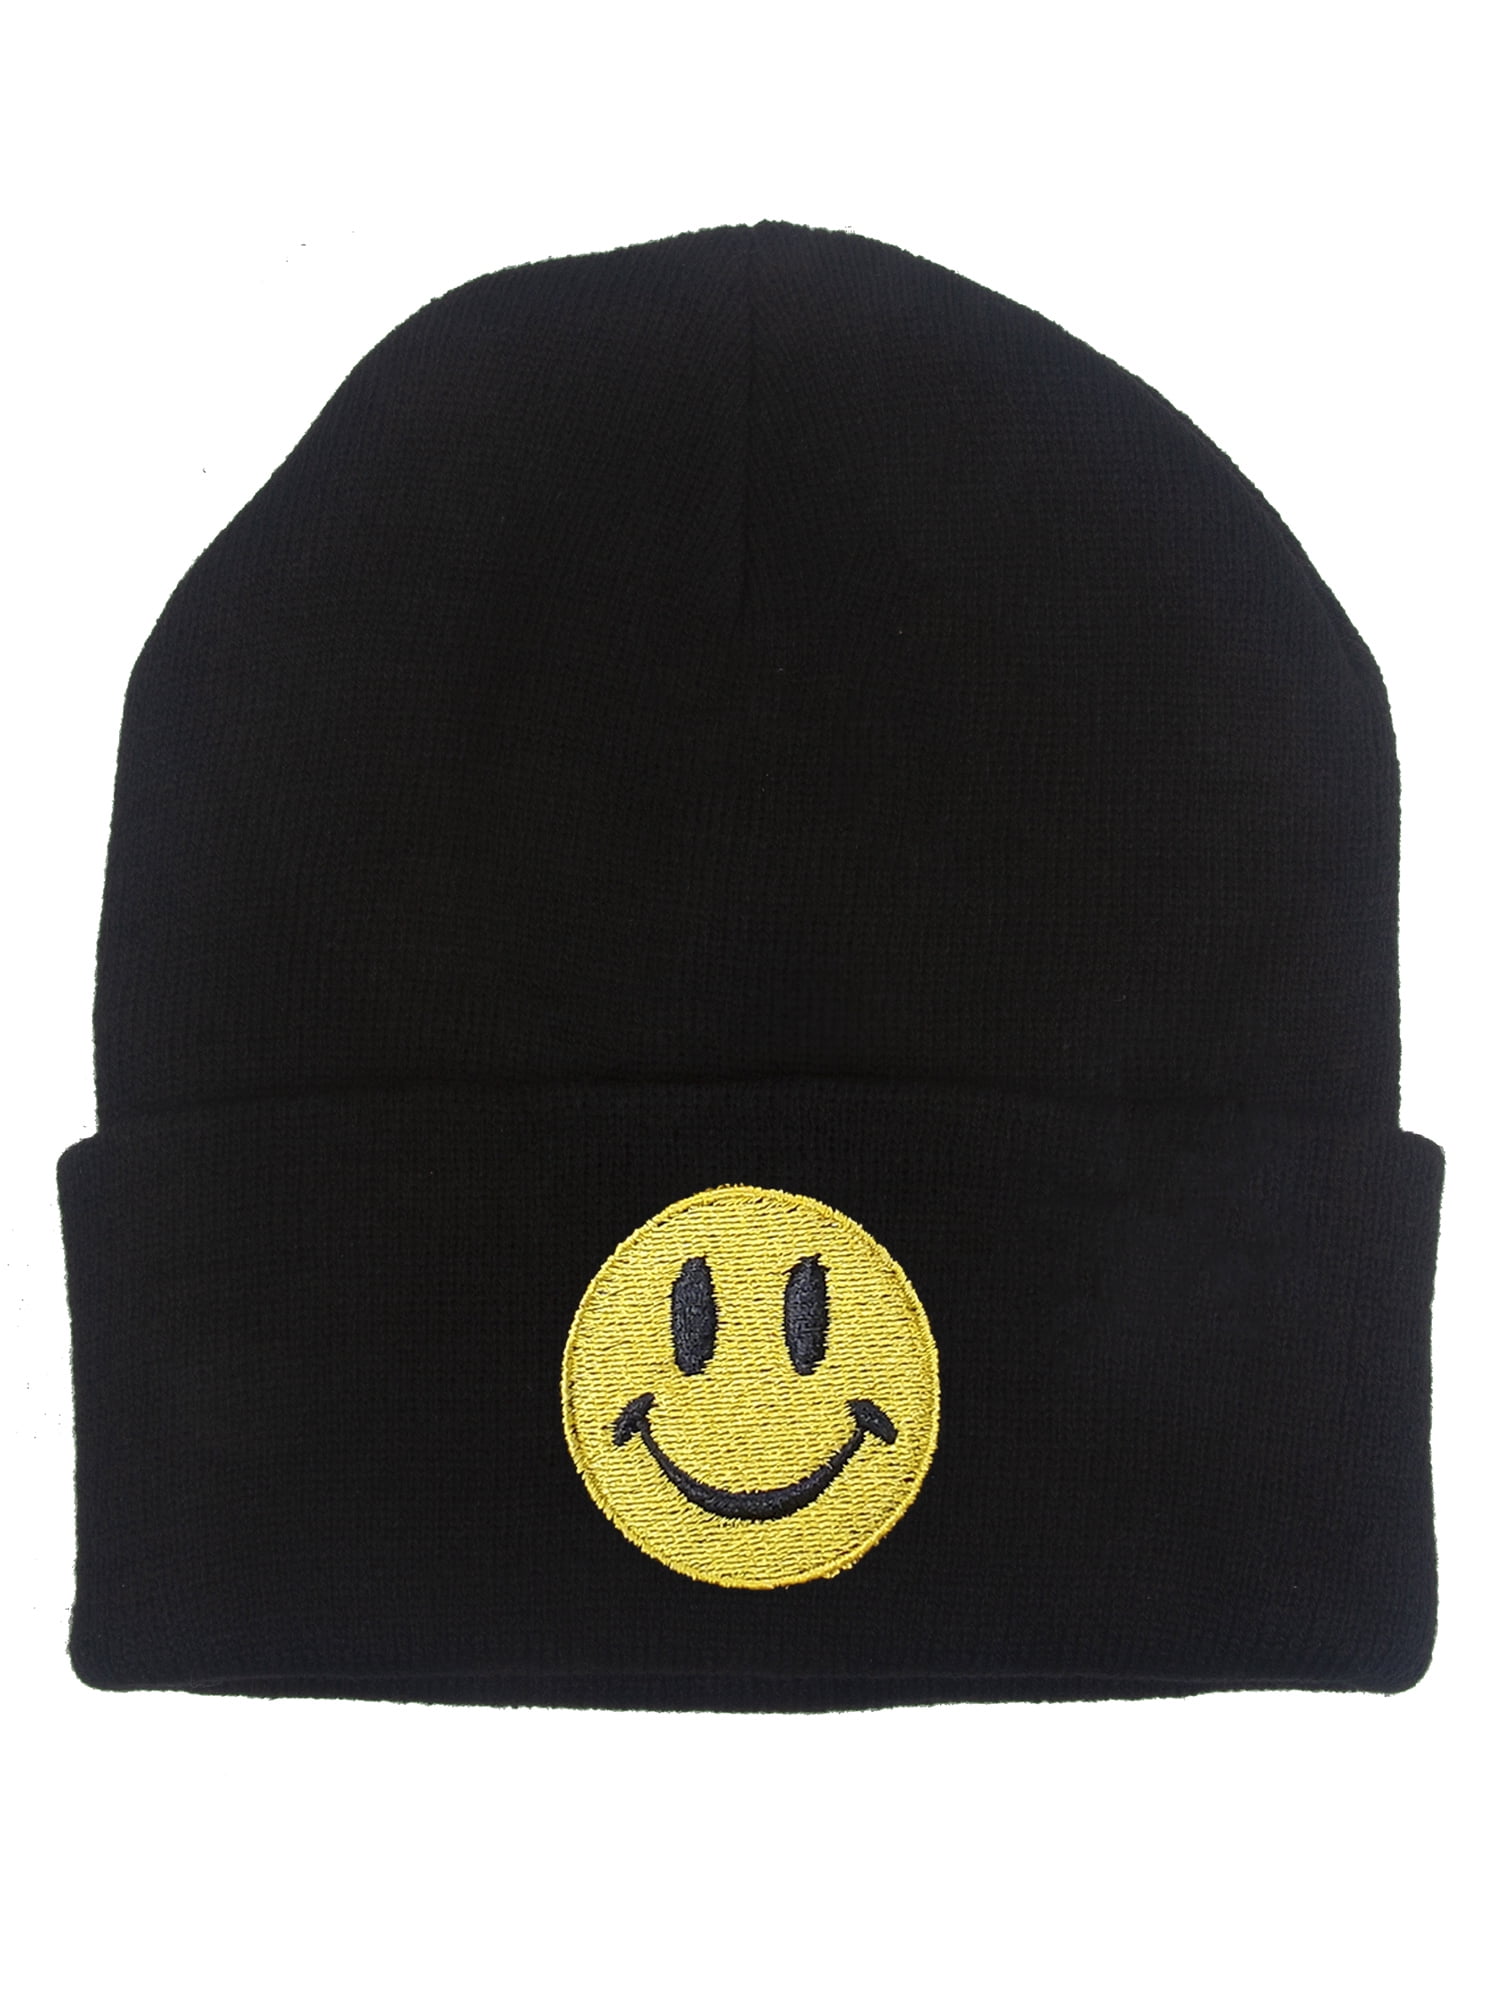 Gravity Face - Beanie Threads - White Smile Classic